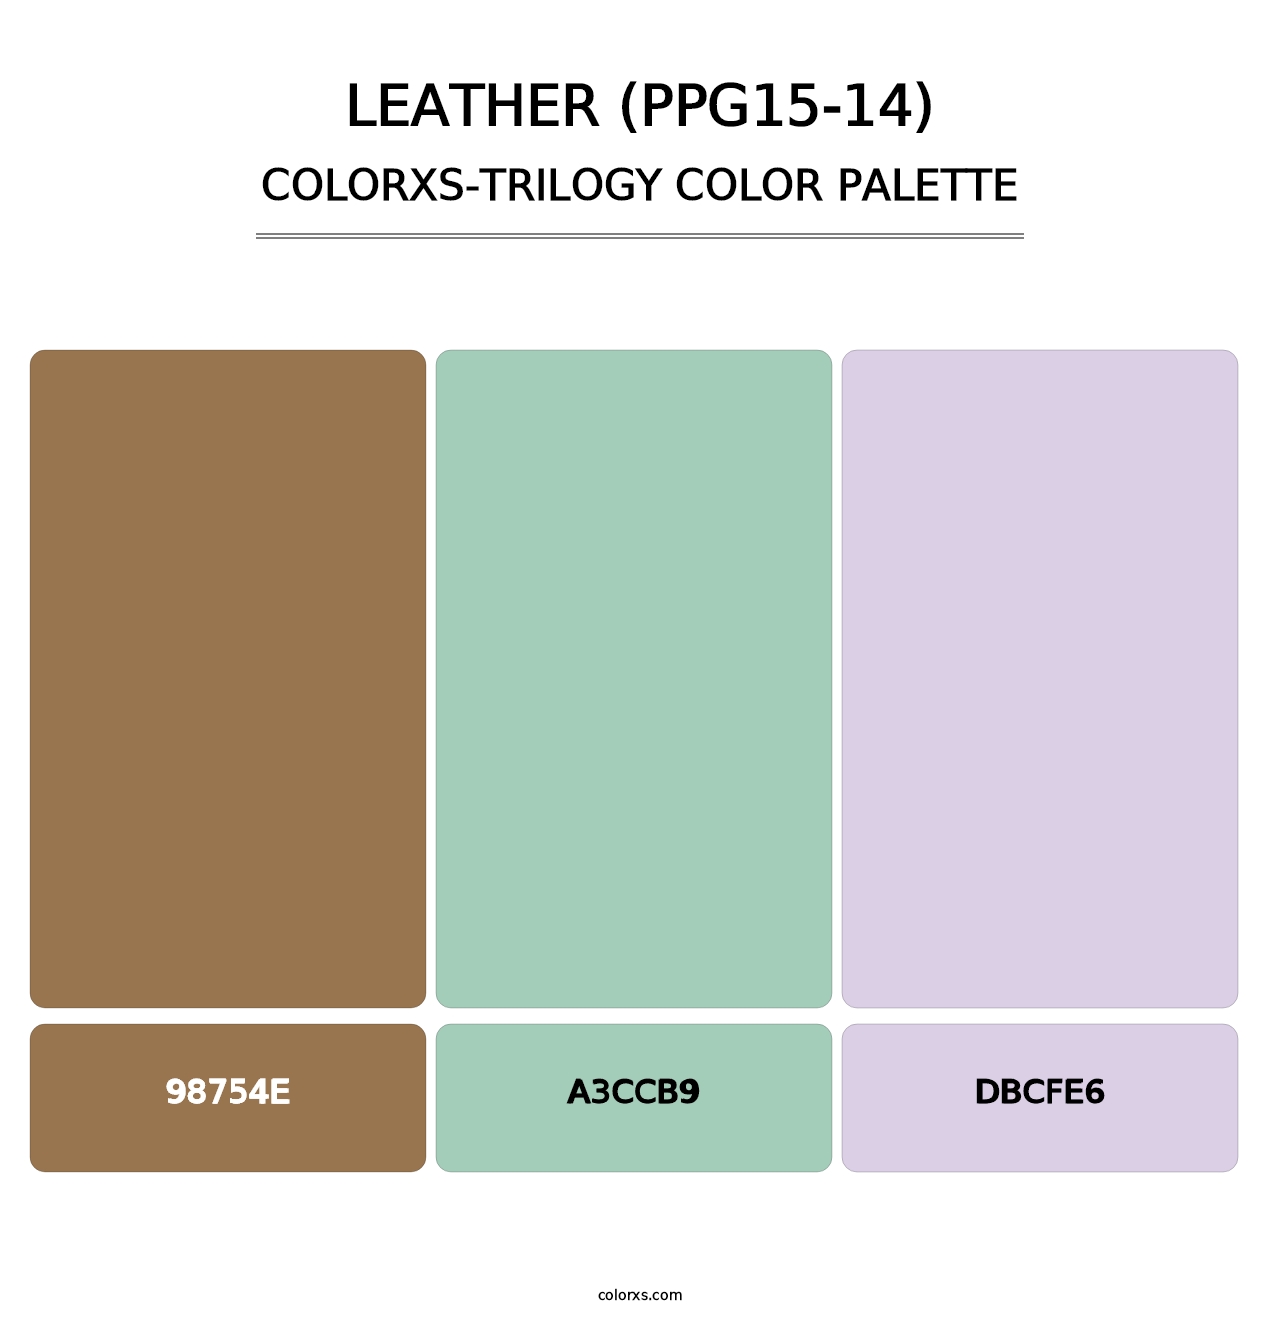 Leather (PPG15-14) - Colorxs Trilogy Palette